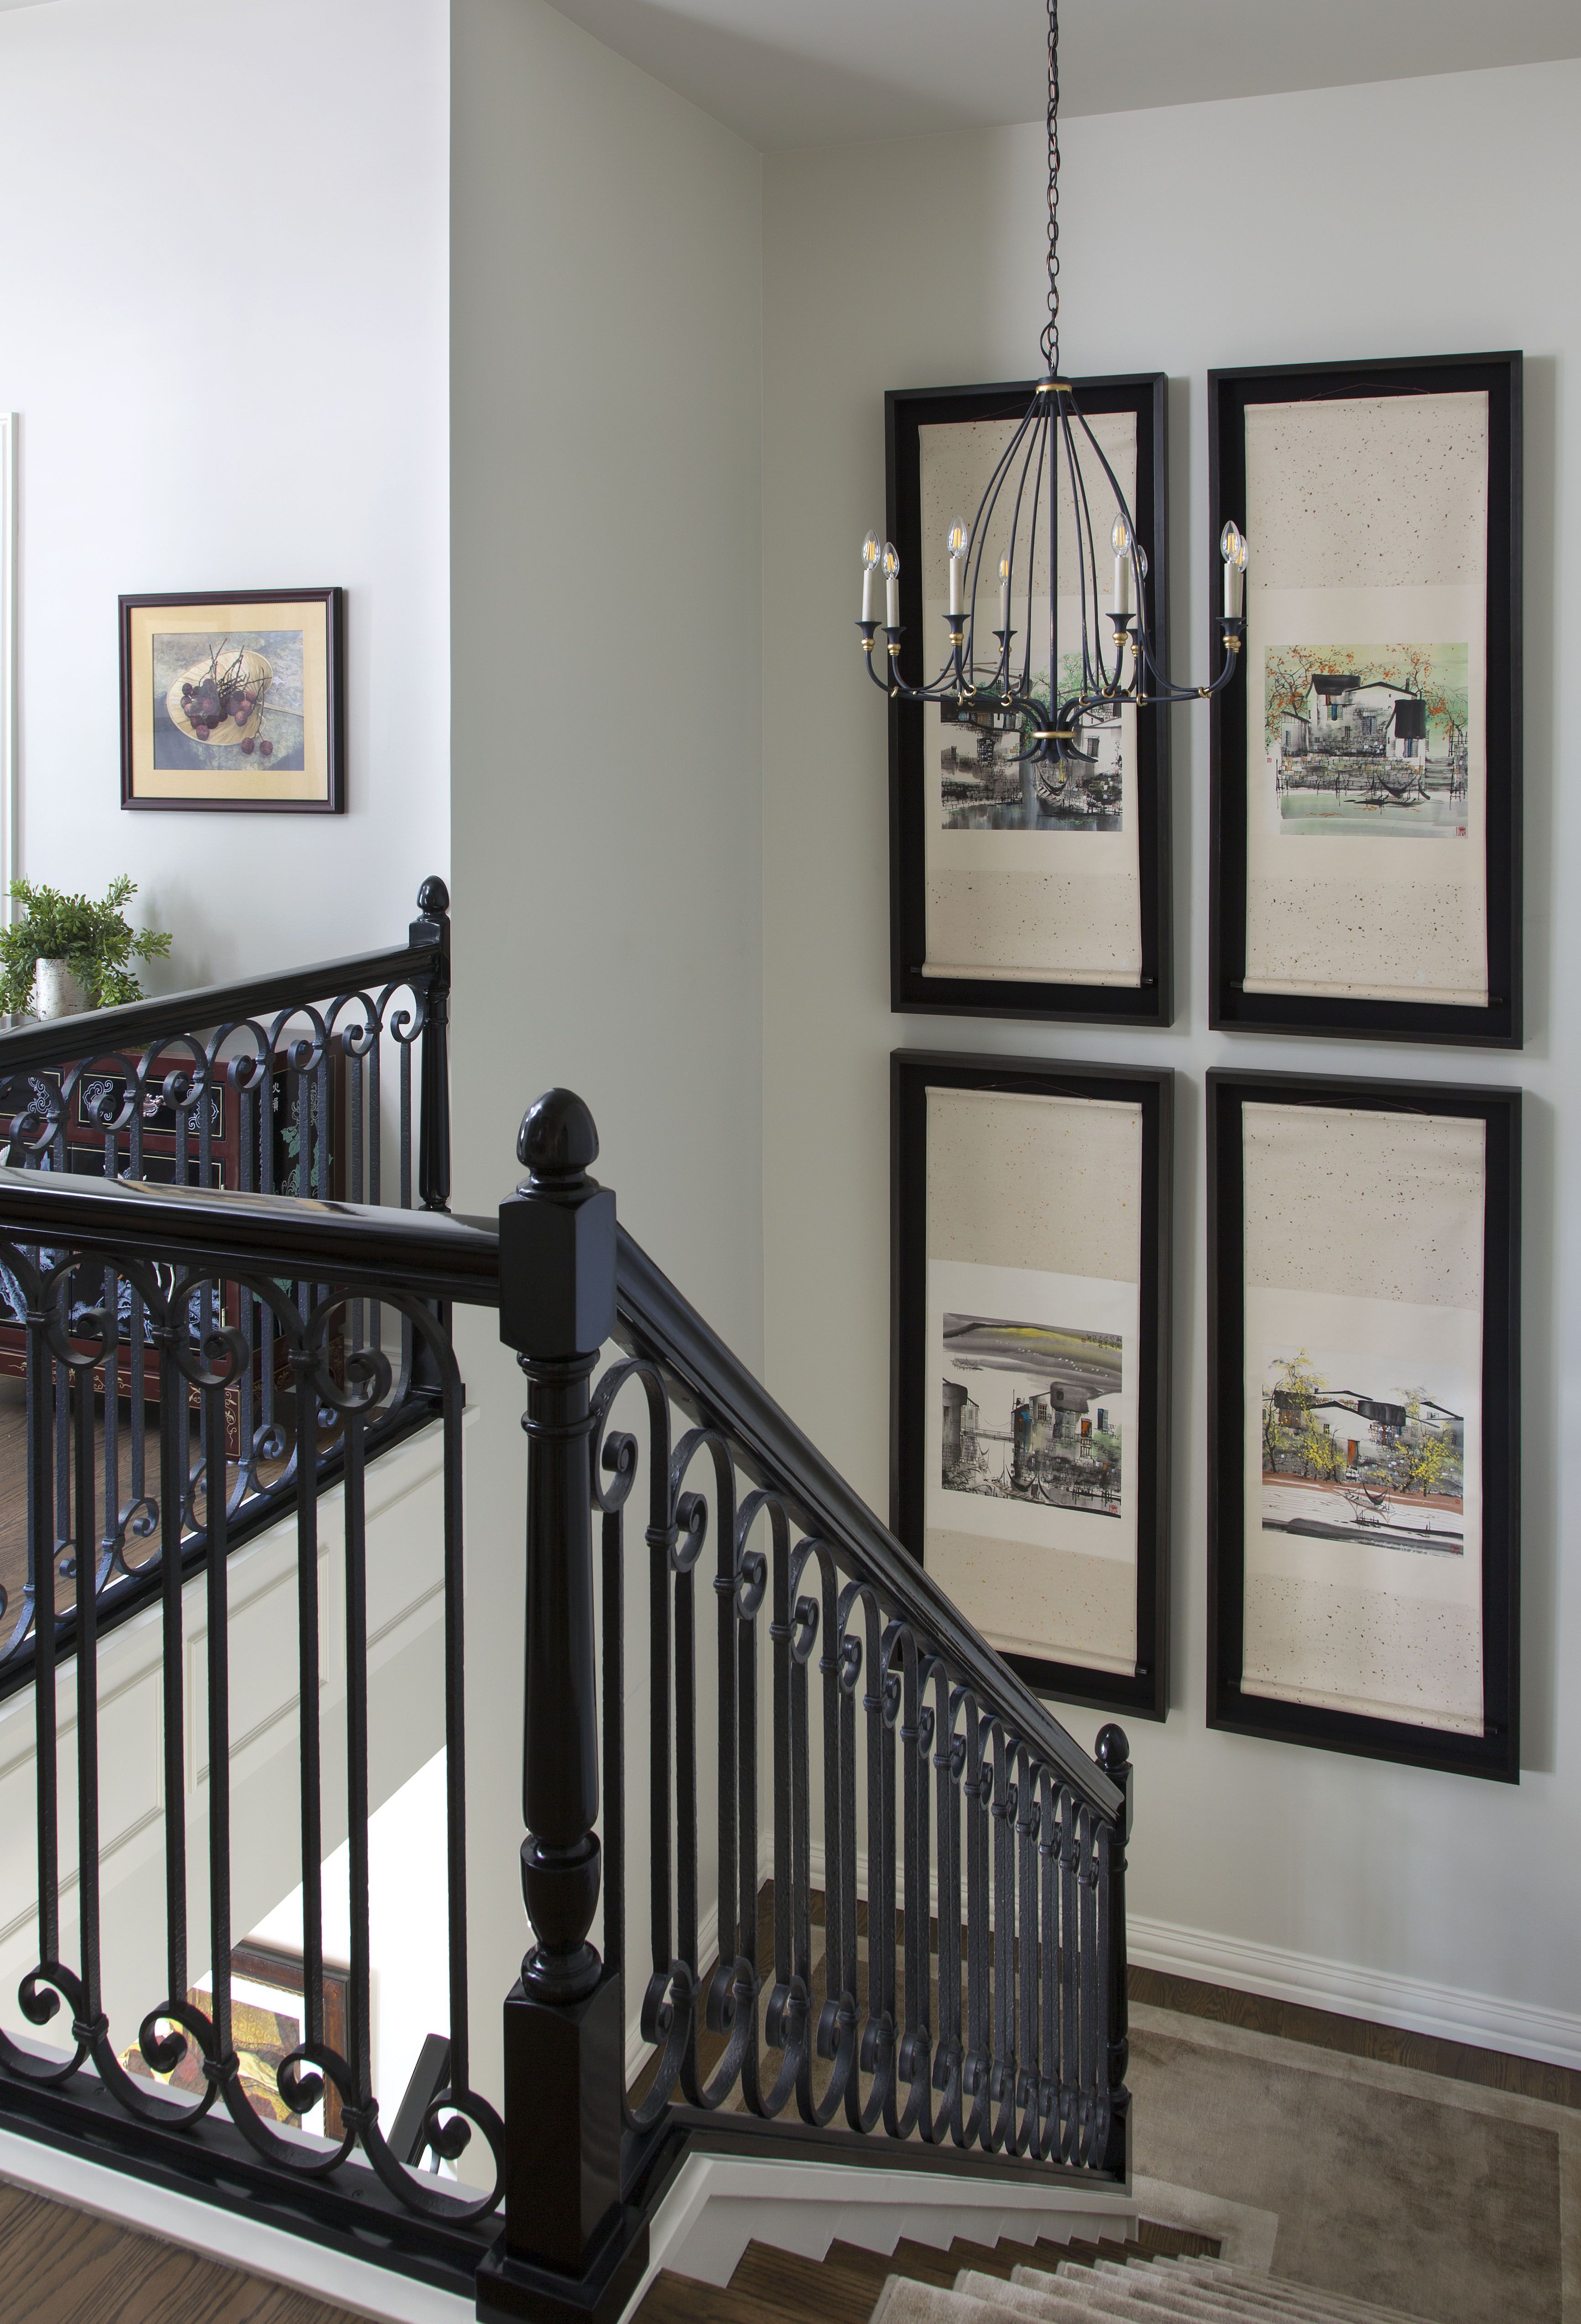 27 Stylish Staircase Decorating Ideas - How To Decorate Stairways